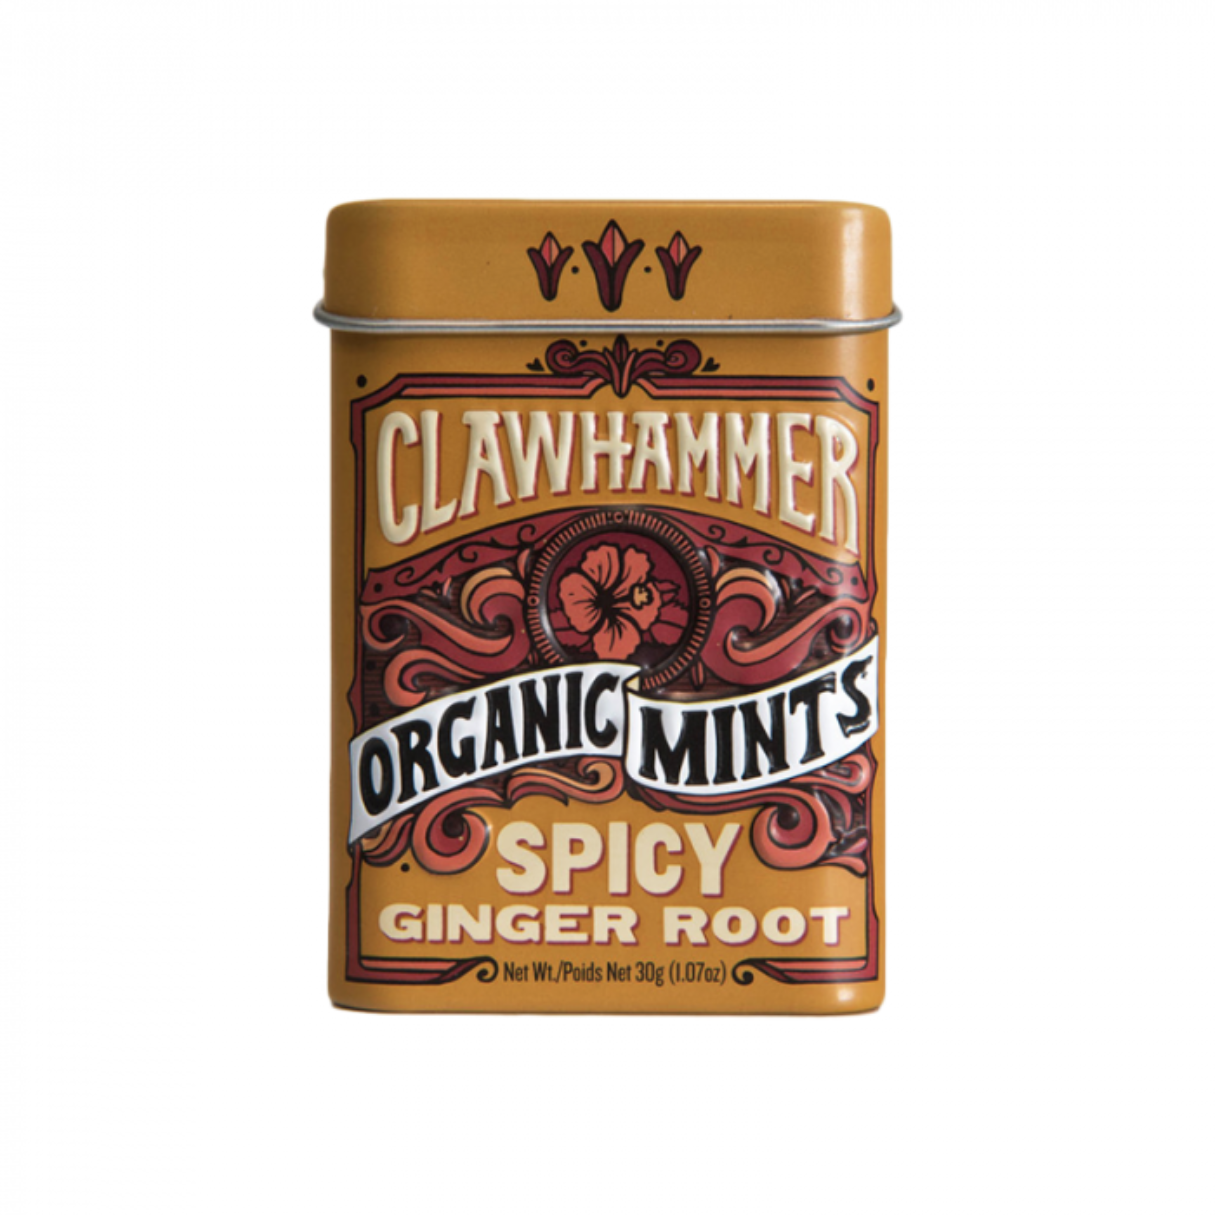 Clawhammer Organic Mints Spicy Ginger Root 1.07oz - 144ct